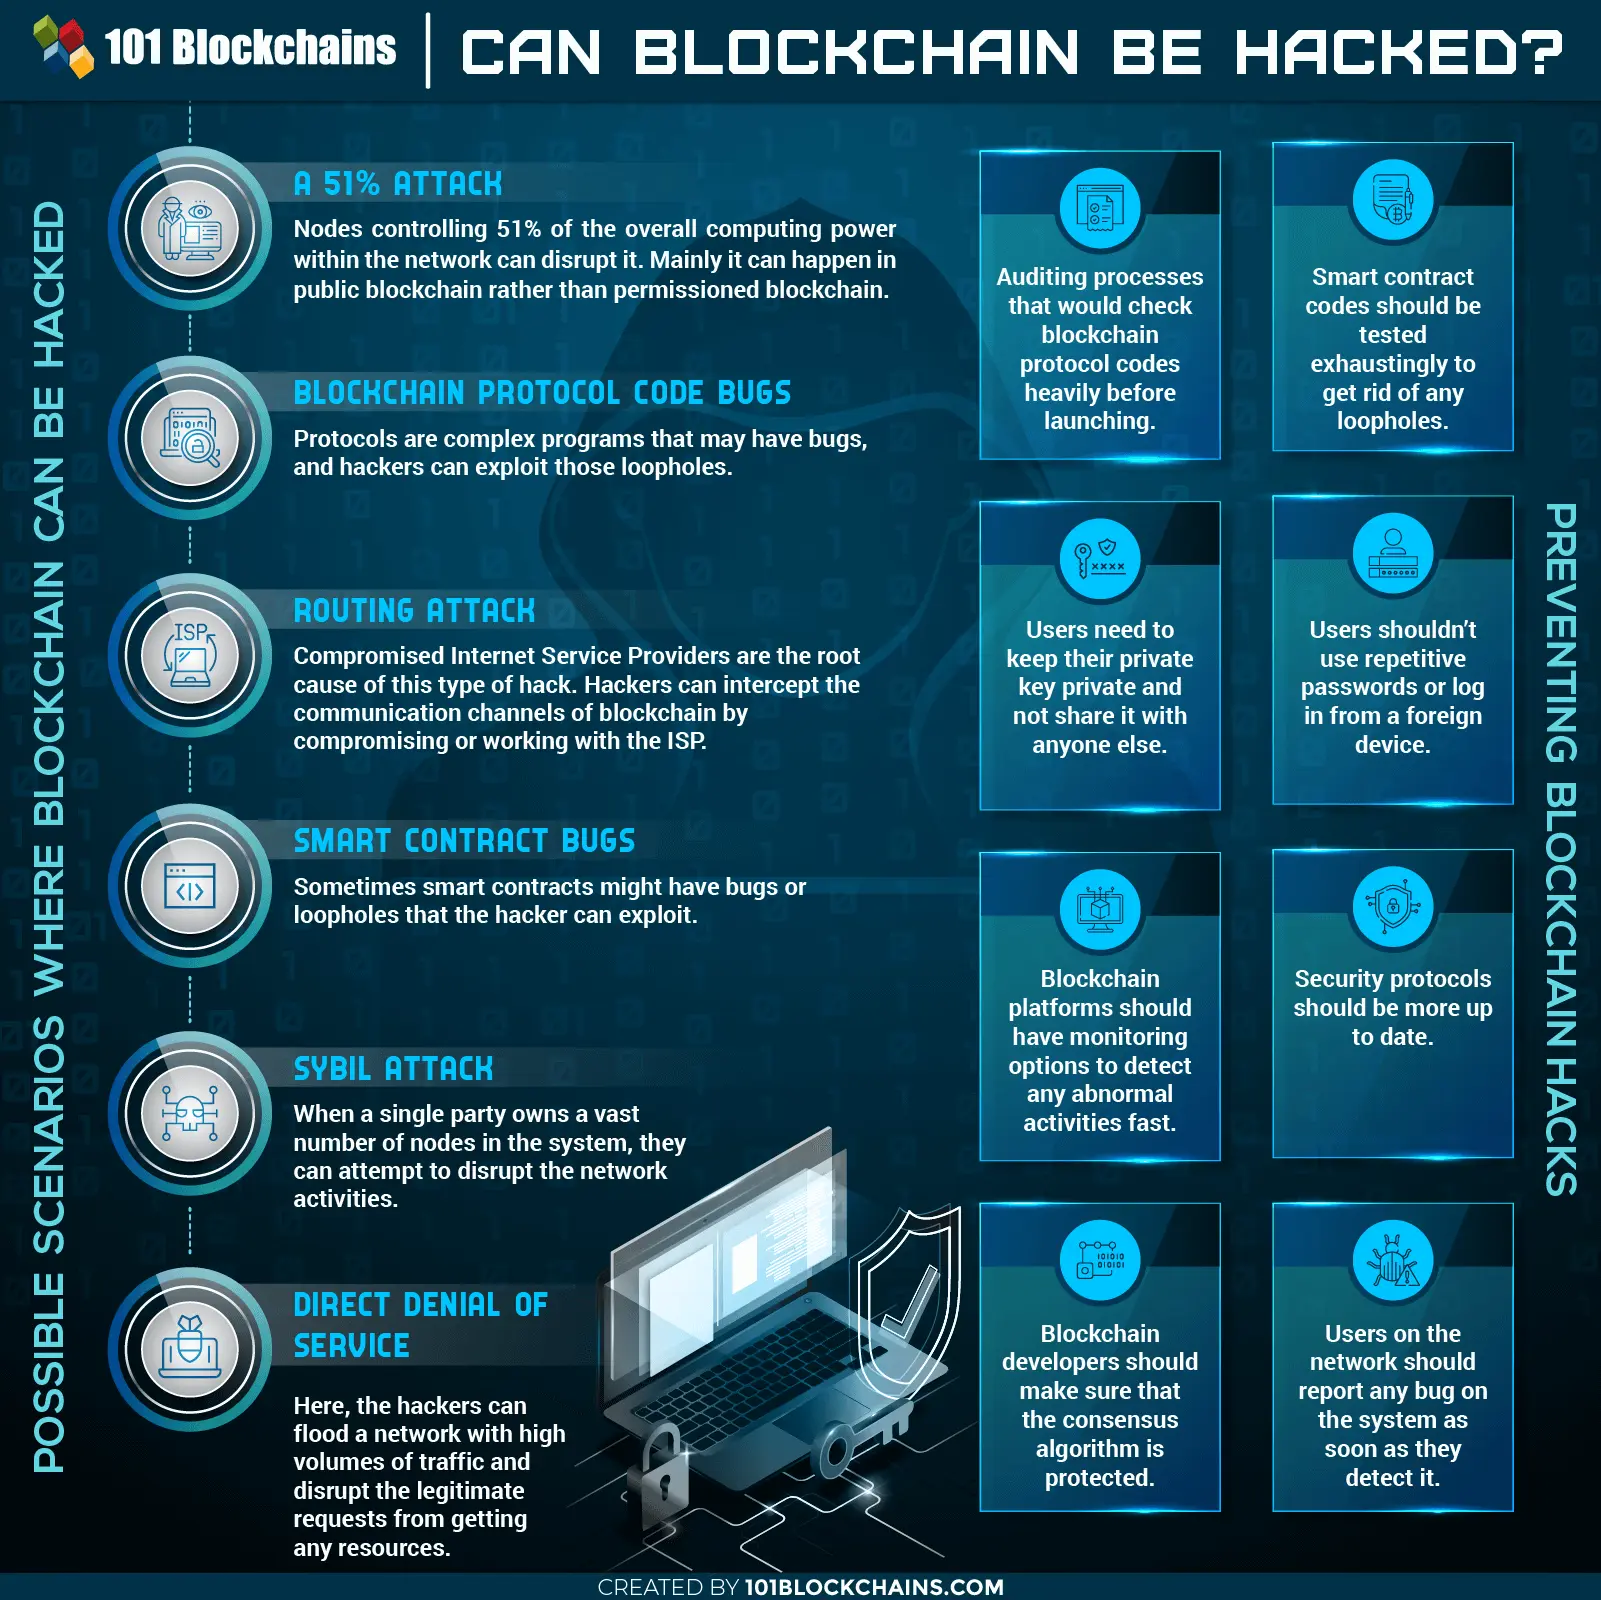 Can Blockchain Be Hacked?